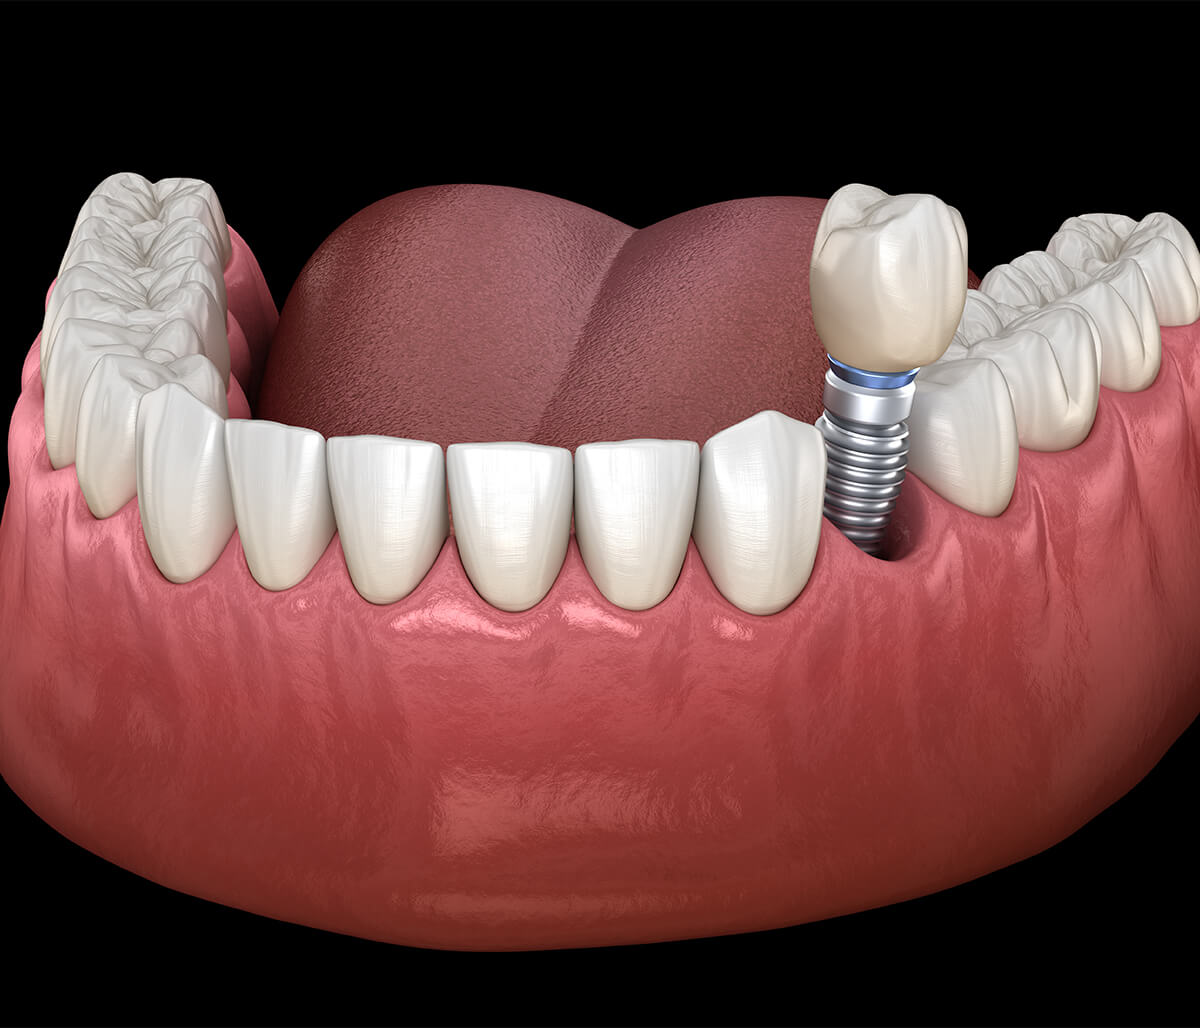 Dental Implants for Back Teeth in Bloomington IL Area